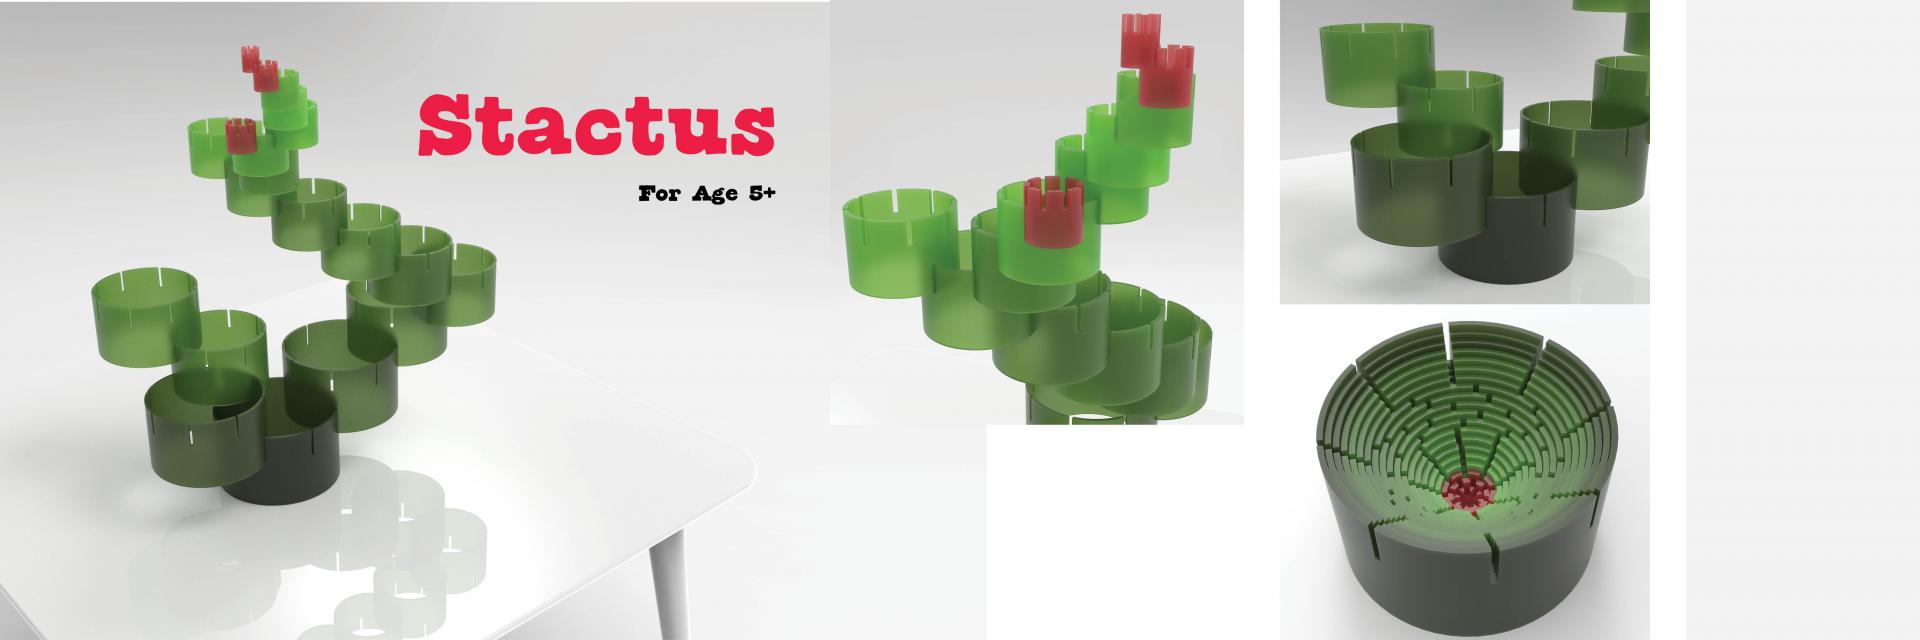 Renders of a colorful cactus toy